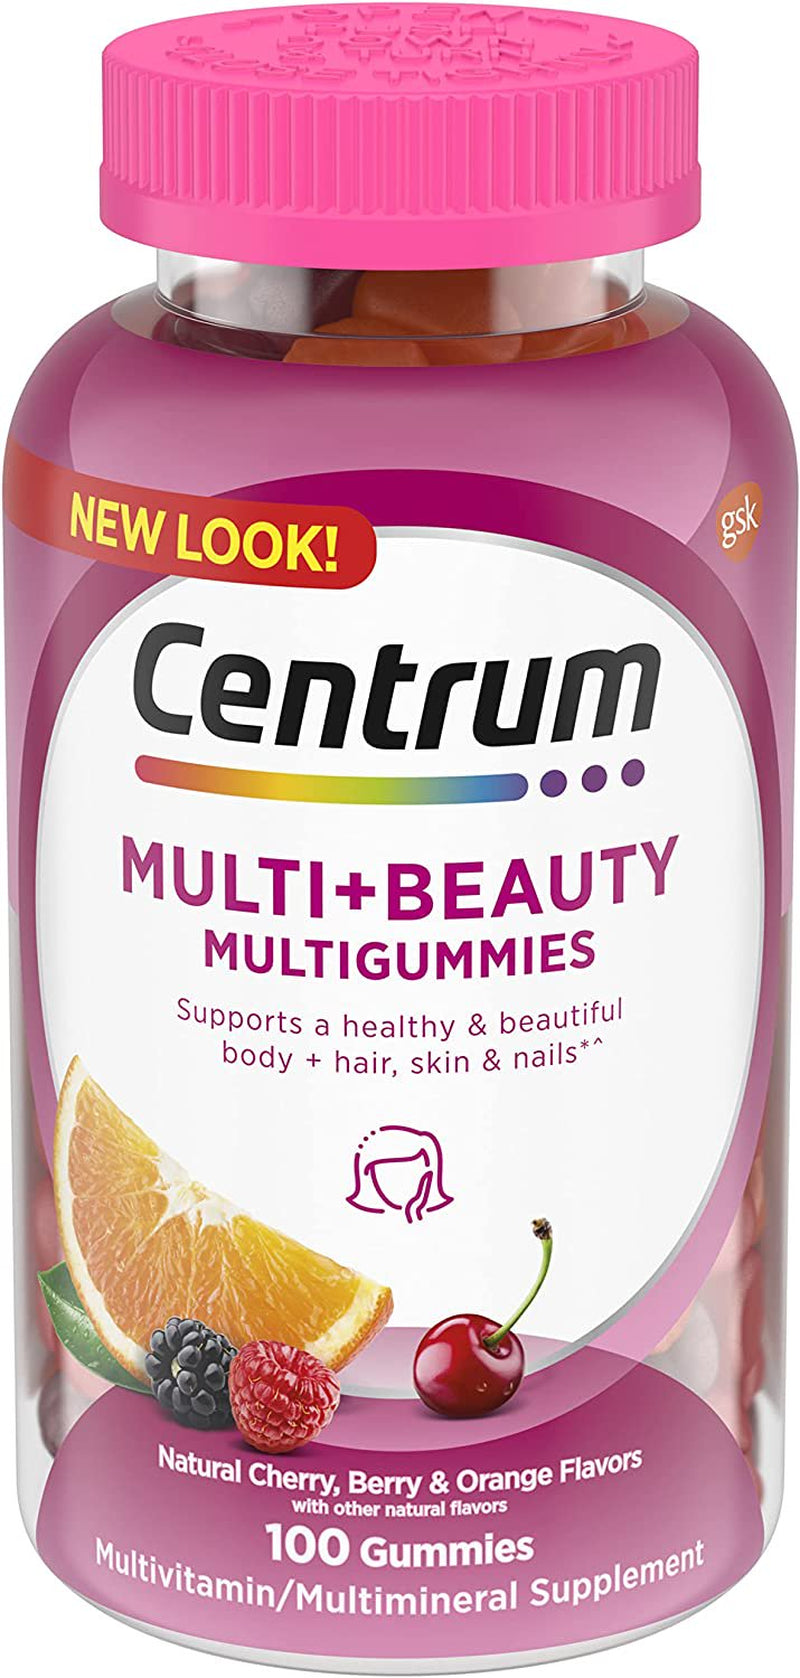 Centrum Multigummies Multi+ Beauty Dual Action Multivitamin, Specially Designed with Biotin for Healthy Hair, Skin and Nails, Cherry/Berry/Orange Flavors - 100 Count